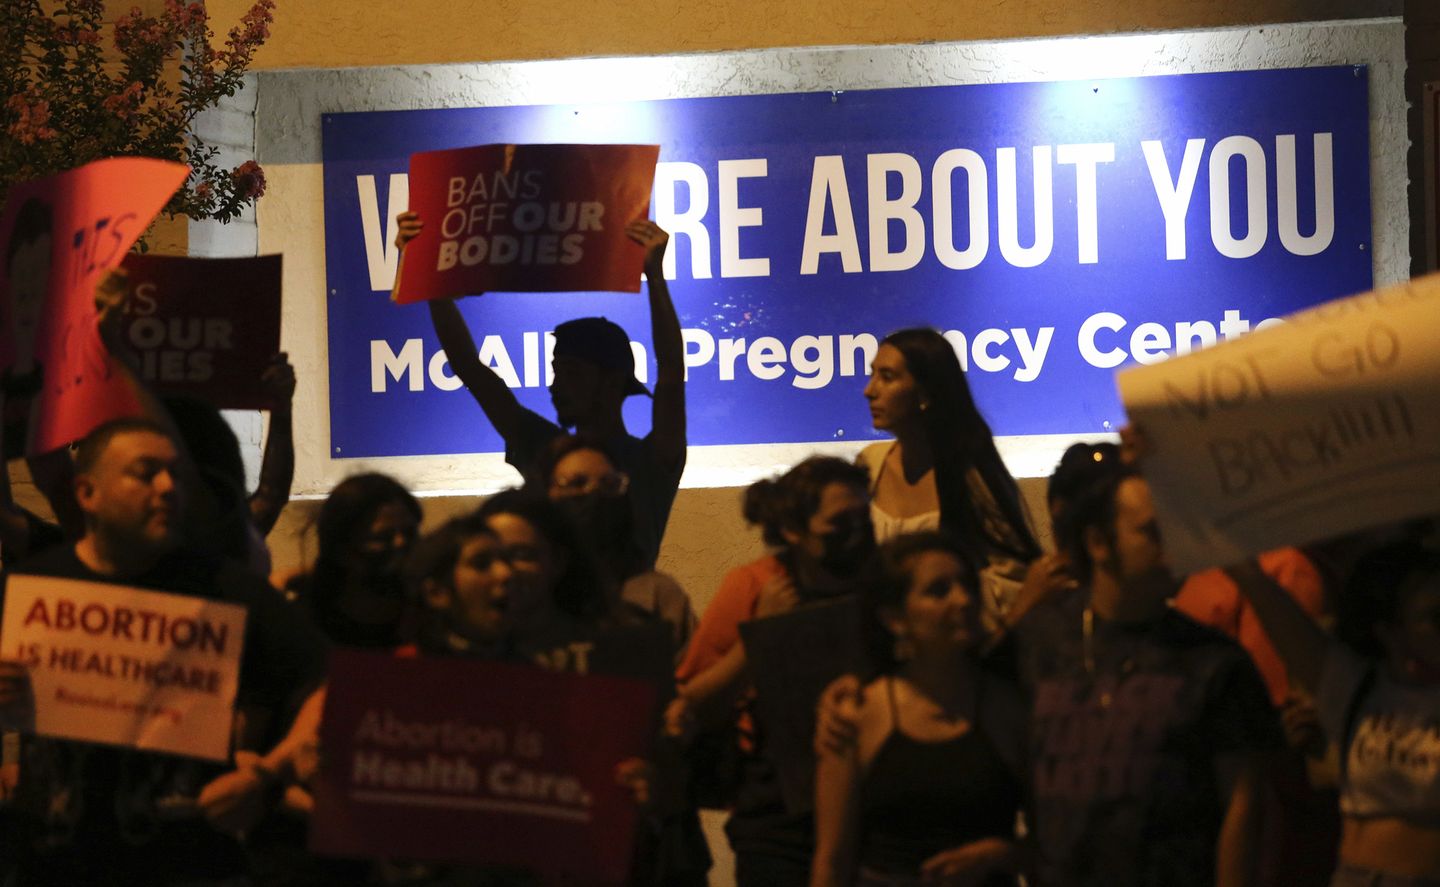 Texas Clinics Stop Aborting After a State High Court Decision